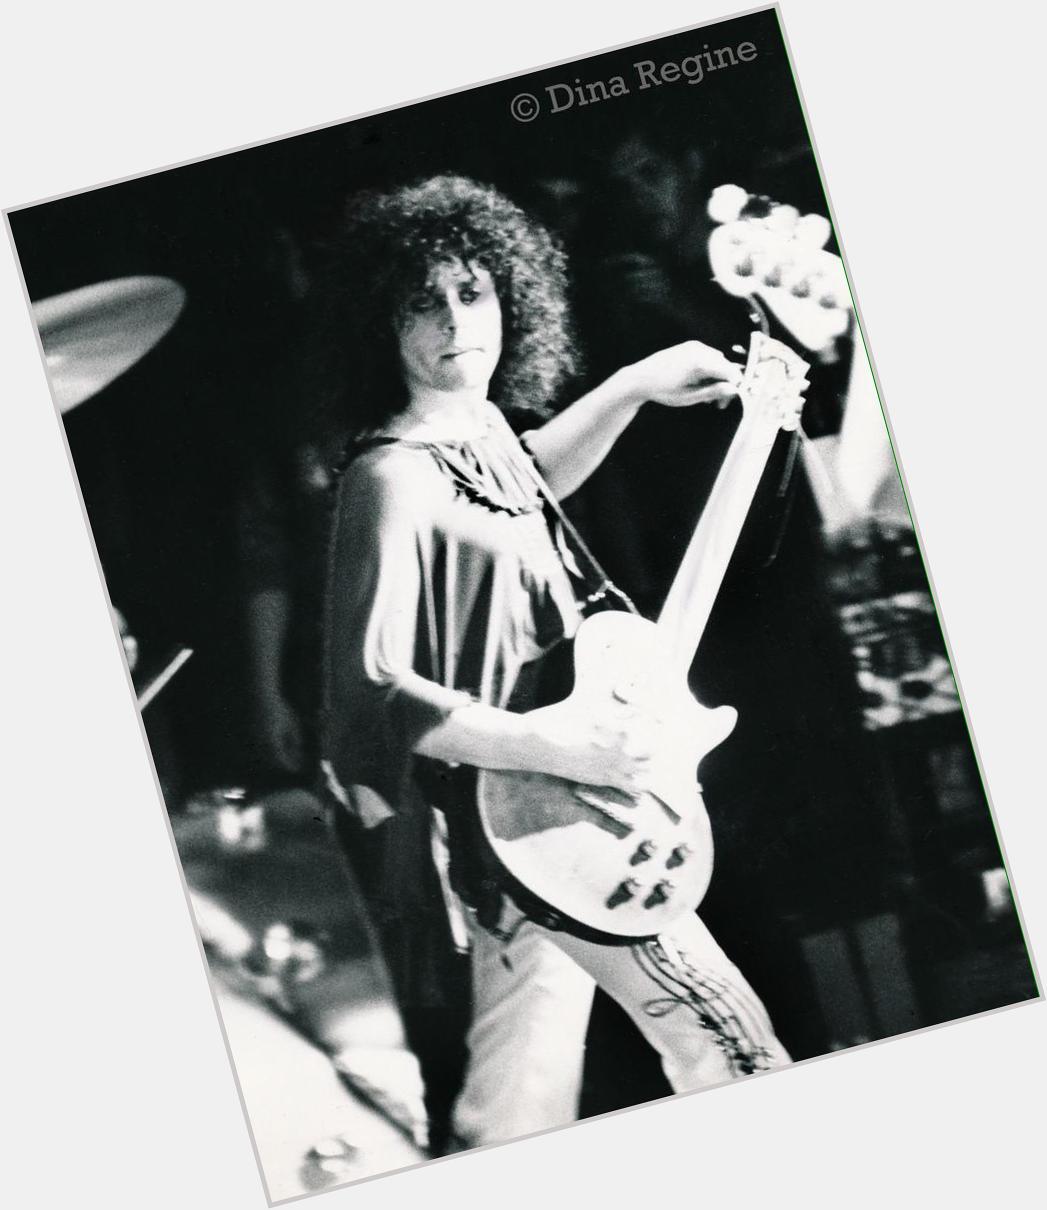 A very Happy Birthday to am man who has inspired me for years, poet, rock star and legend Marc Bolan 